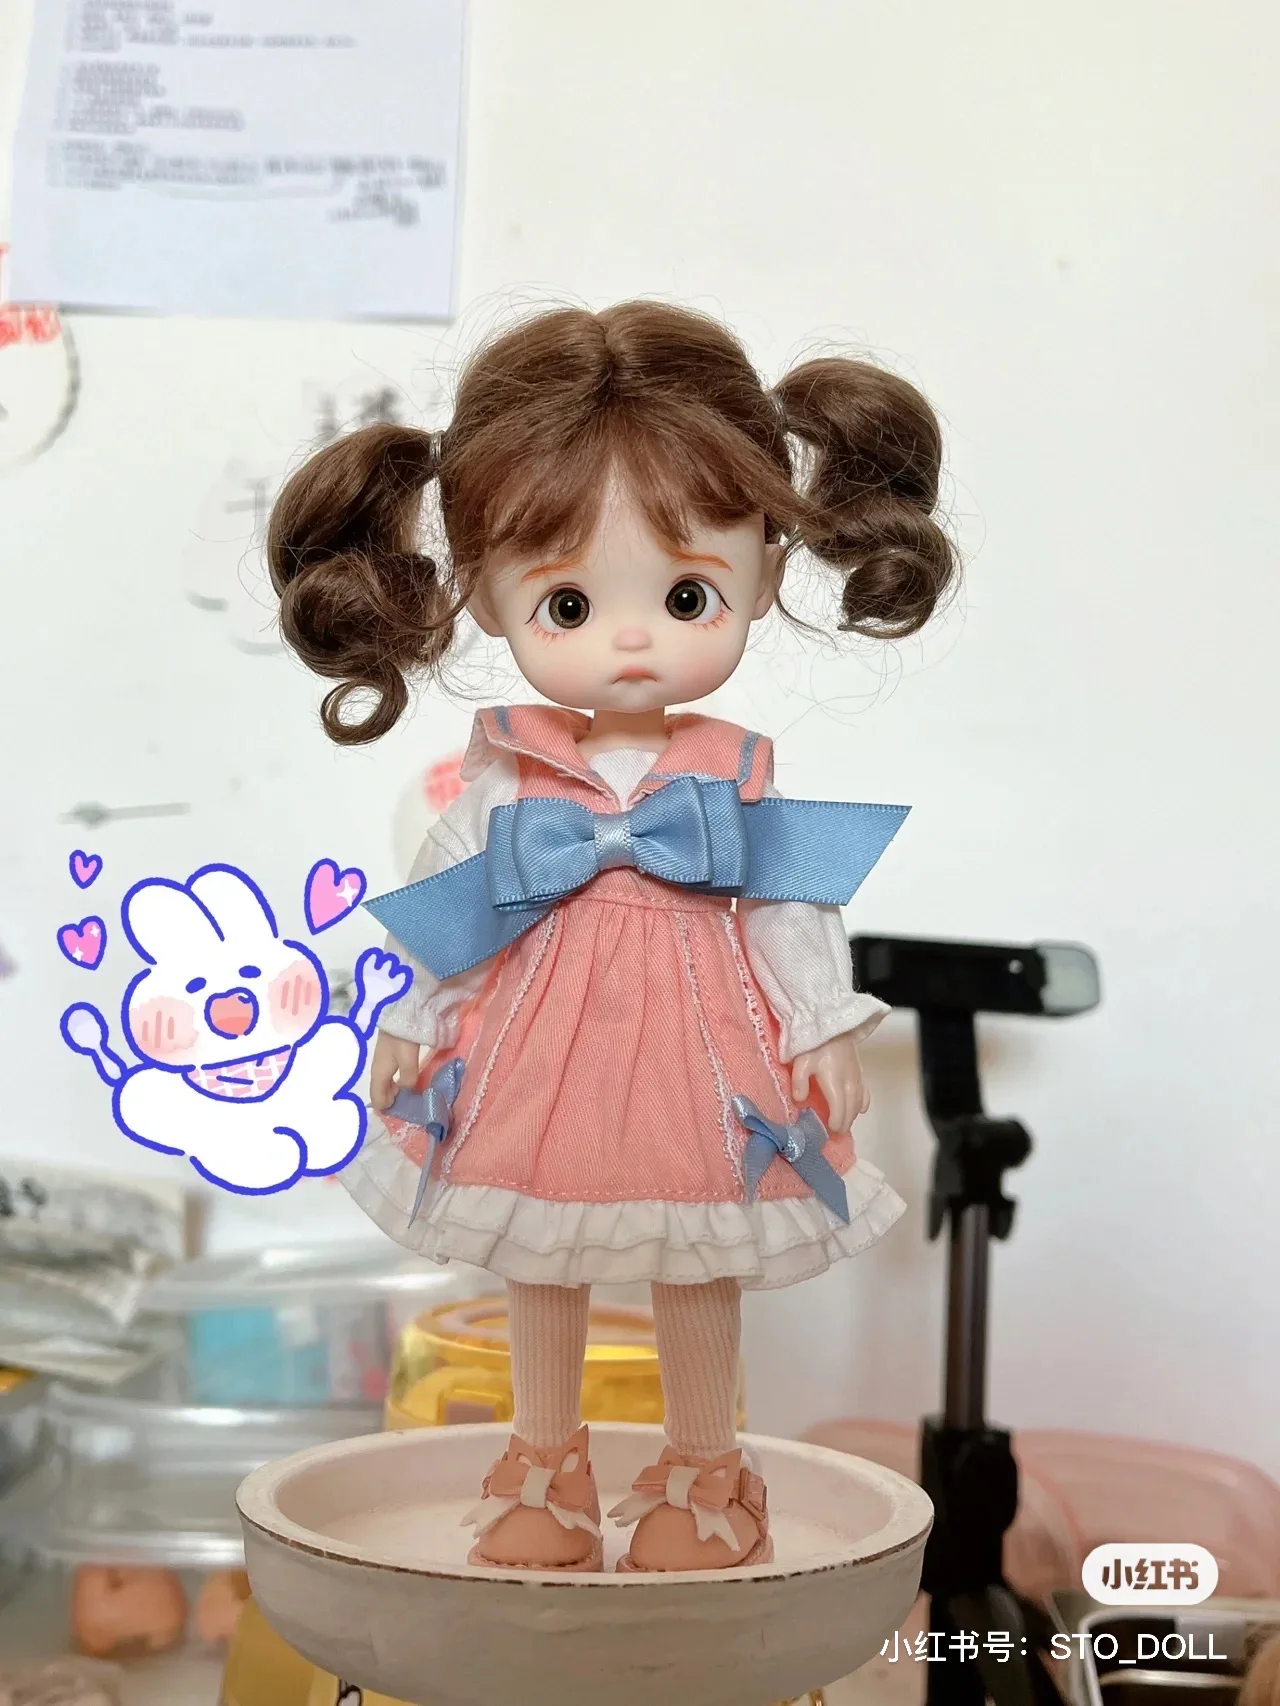 [stodoll] Egg Smile Dimple Betty 8 Points Bjd Mechanical Joint Doll Whole Baby Bjd Doll  Ball Jointed Doll 1/8 Dolls